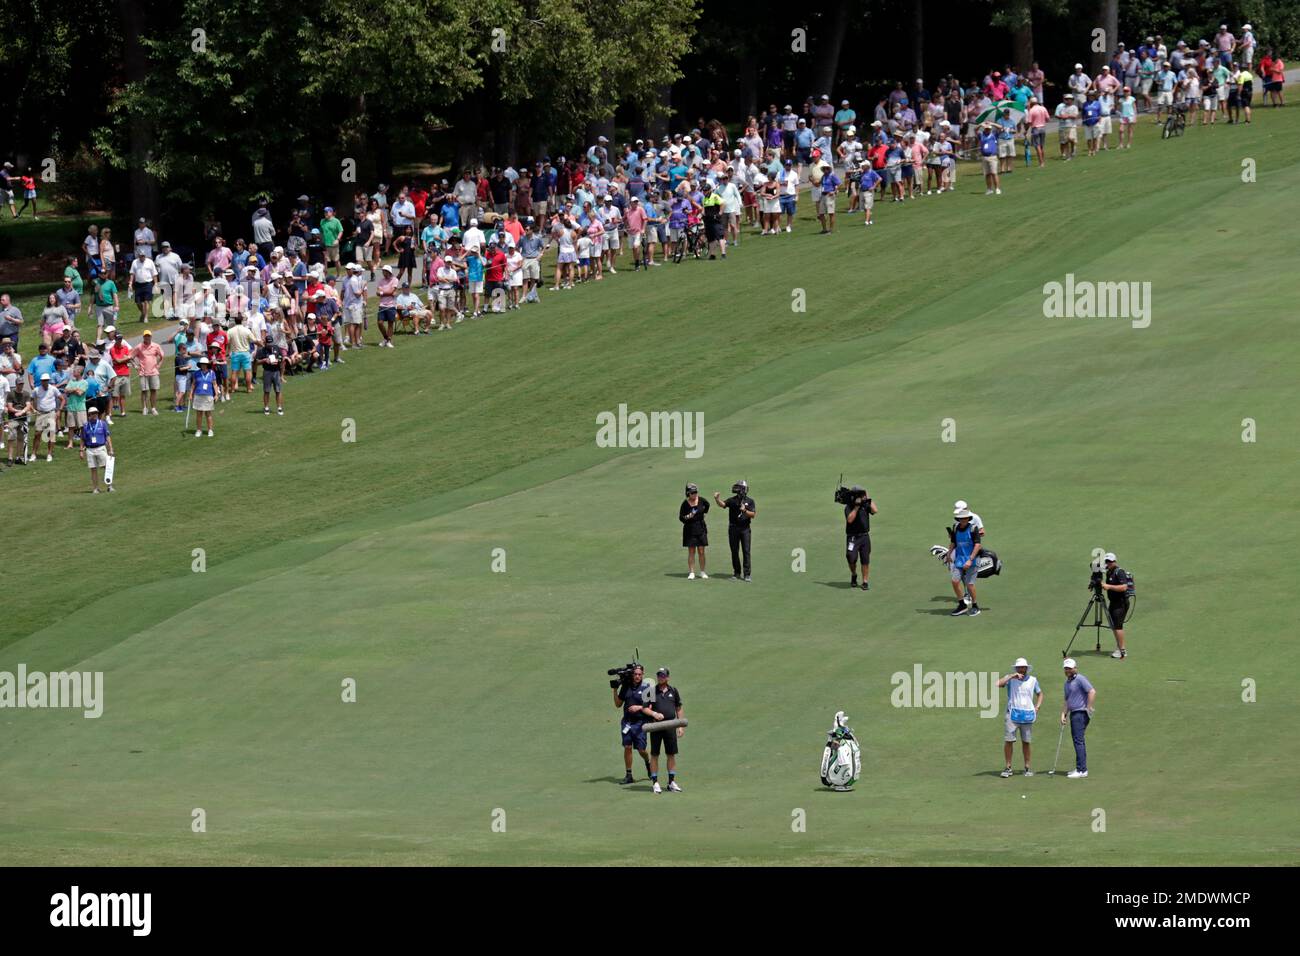 Fans watch as the final group approaches the 18th hole during the final round of the Wyndham Championship golf tournament at Sedgefield Country Club in Greensboro, N.C., Sunday, Aug